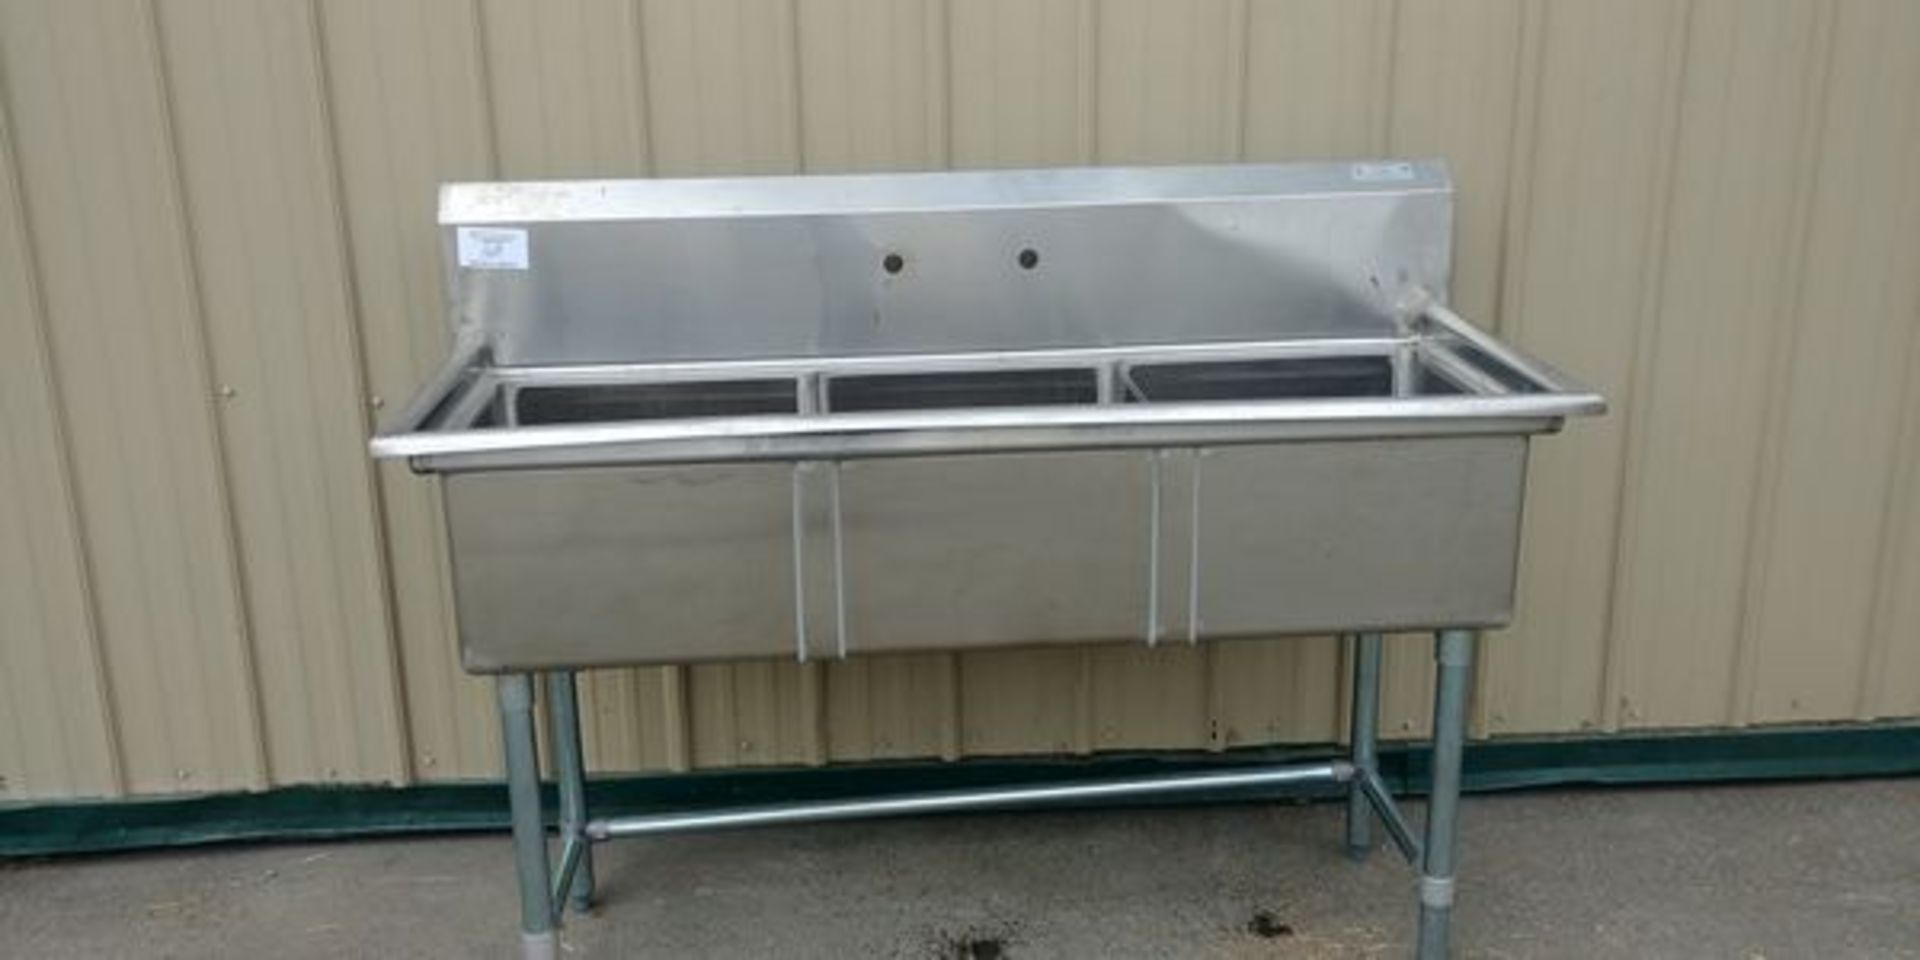 EFI 3 Compartment Stainless Steel Sink